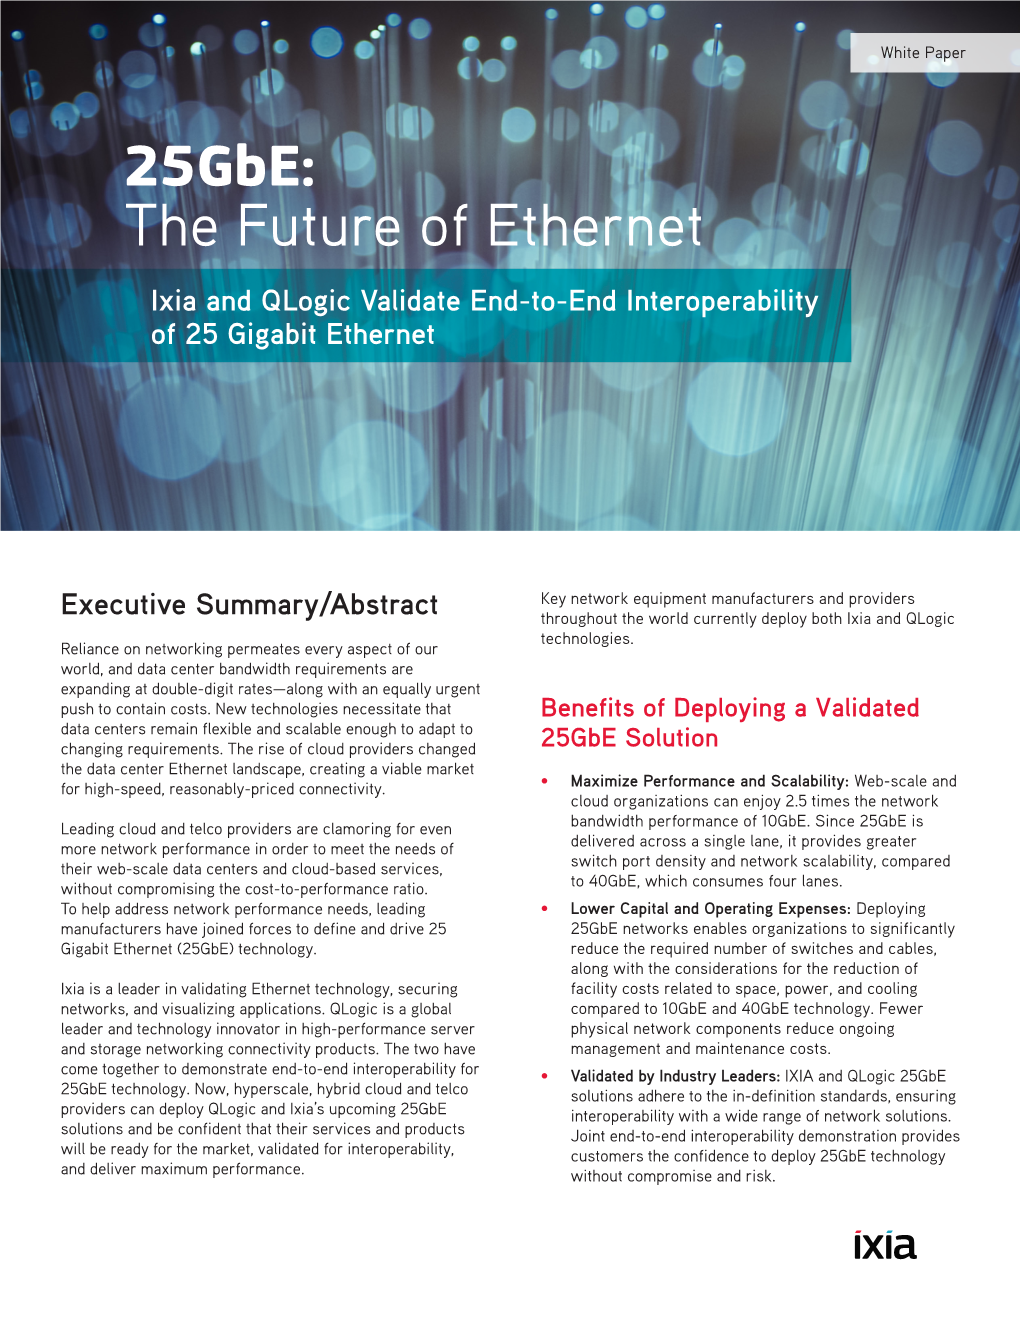 25Gbe: the Future of Ethernet Ixia and Qlogic Validate End-To-End Interoperability of 25 Gigabit Ethernet